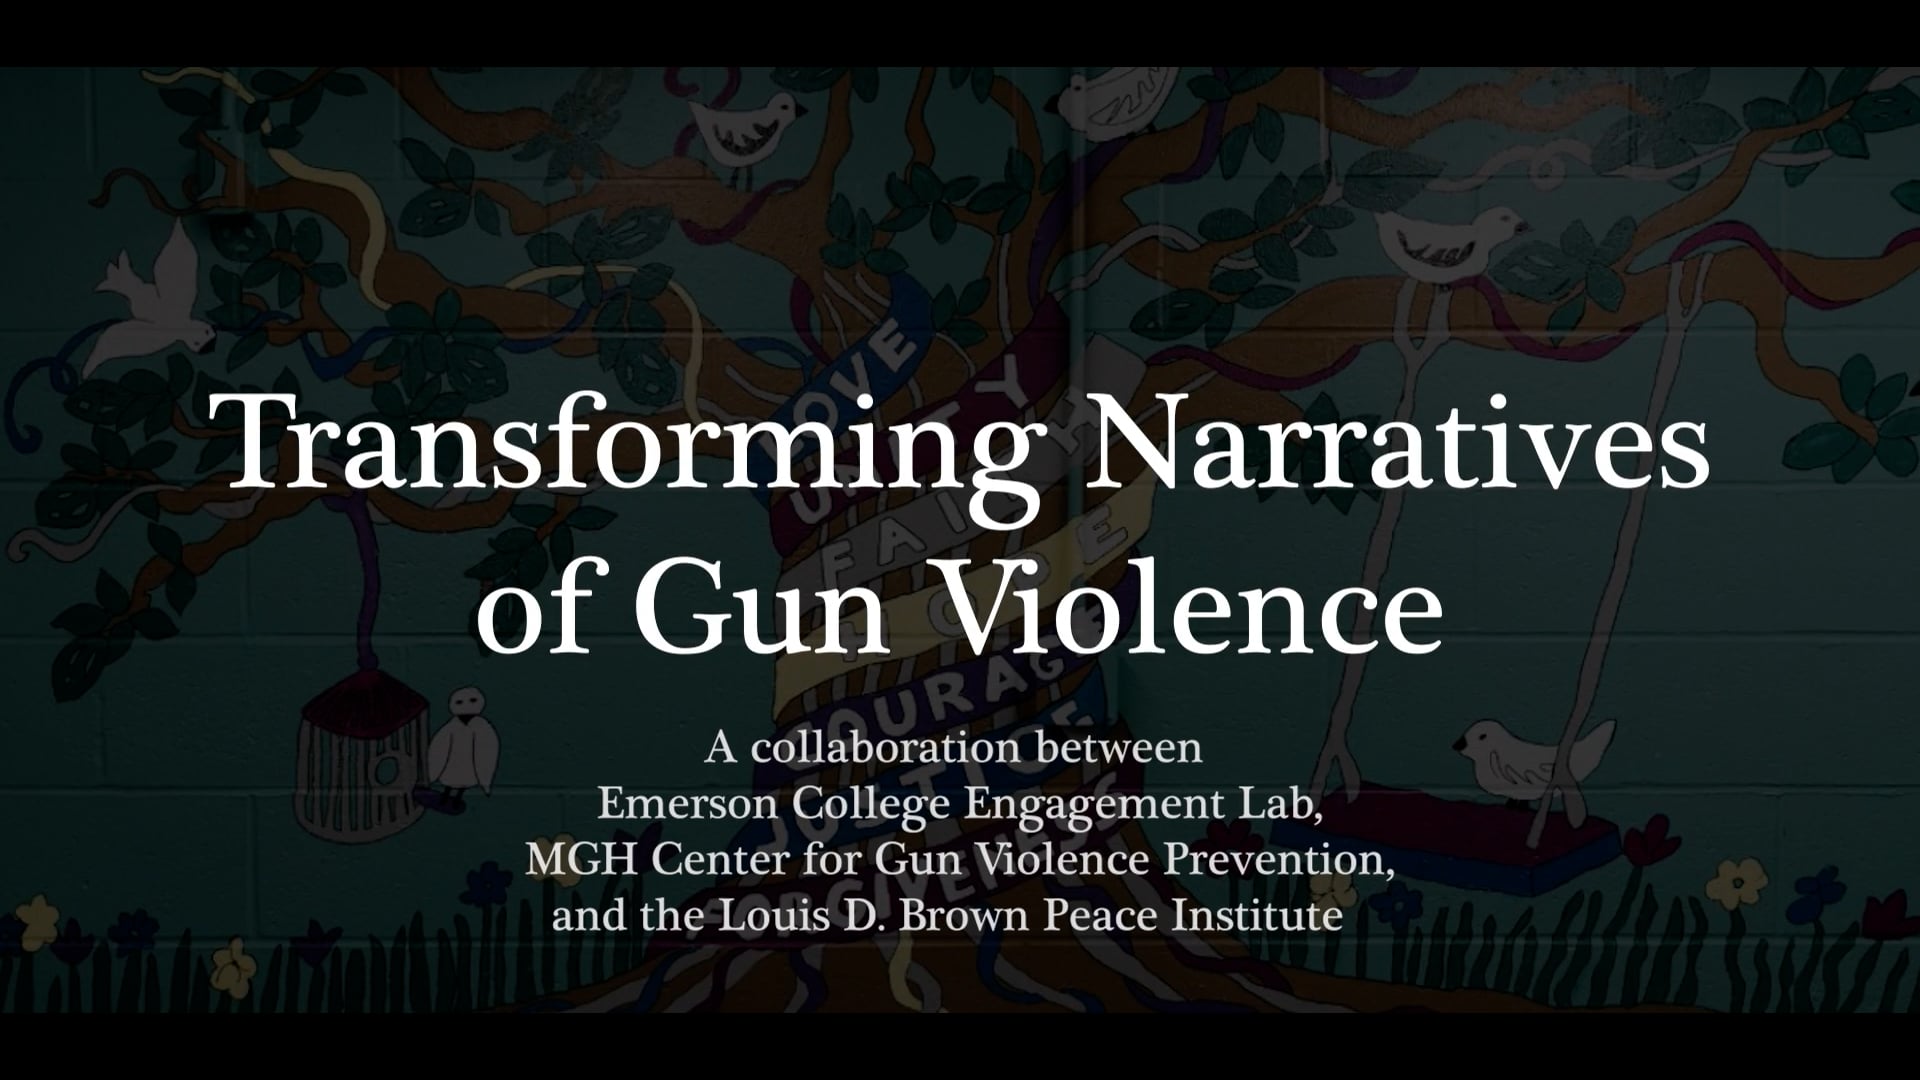 Thumbnail image for video with title "Transforming Narratives of Gun Violence"